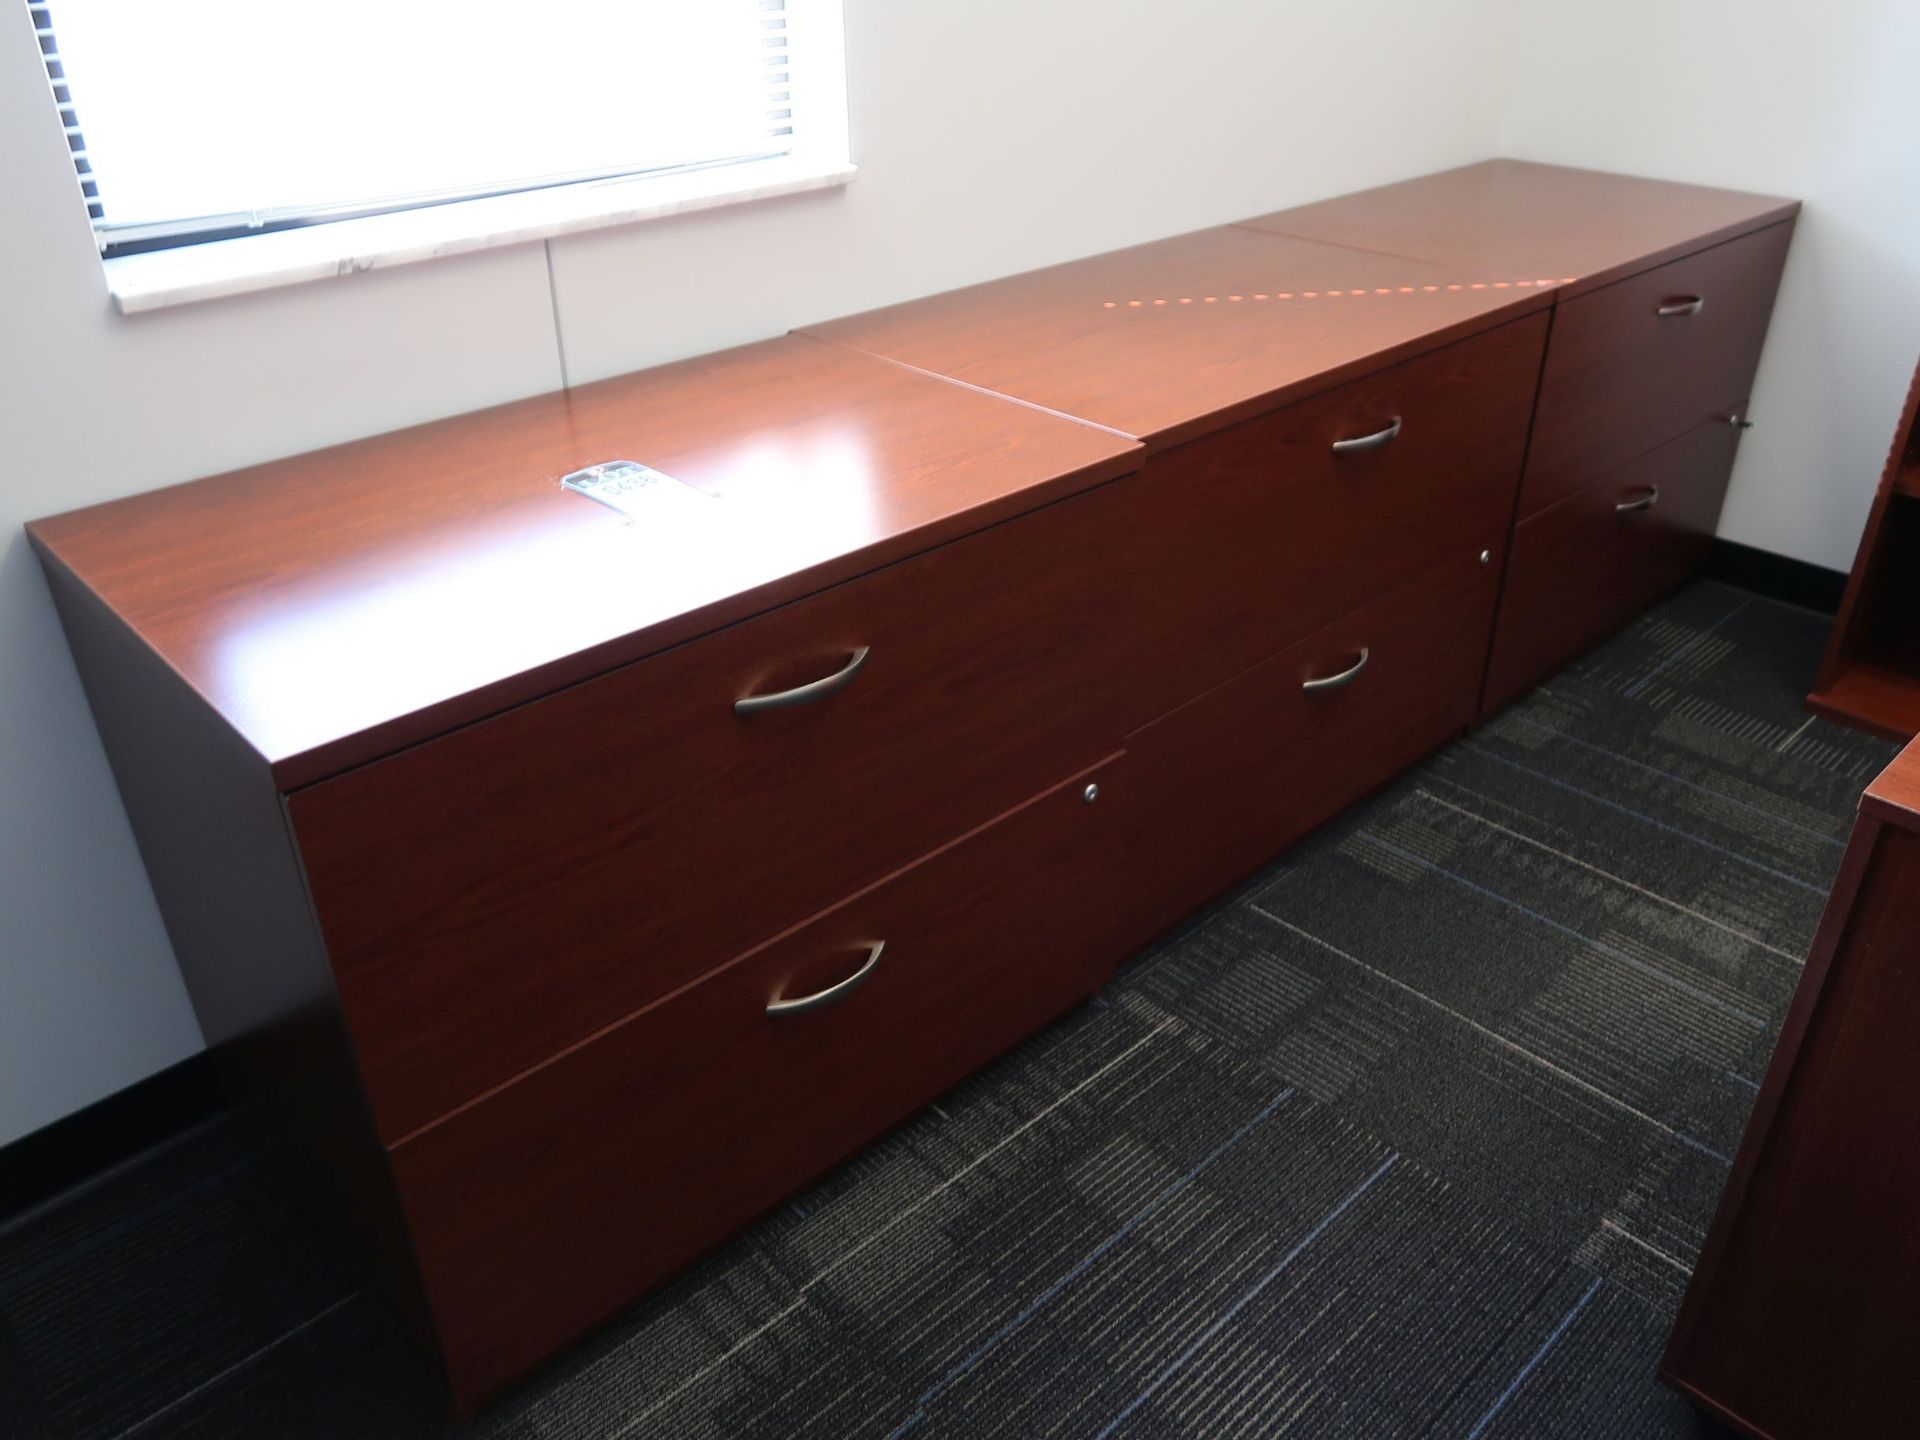 TWO-DRAWER WOOD GRAIN FINISH LATERAL FILE CABINETS